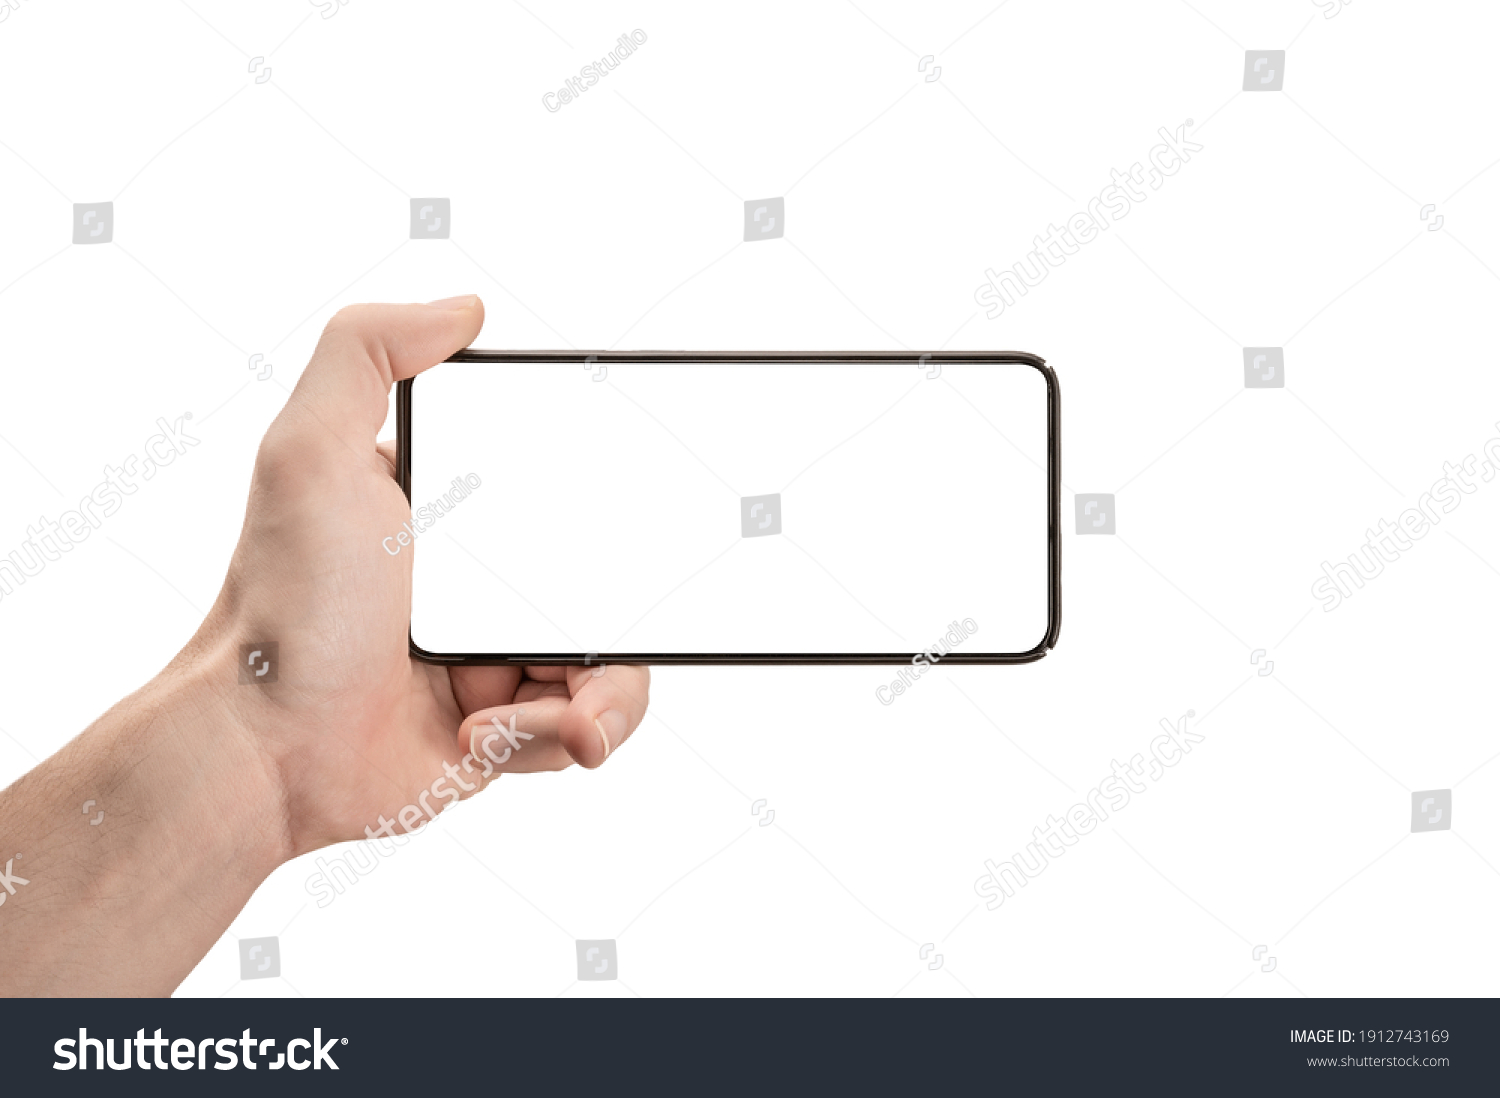 mockup phone horizontal. Hand Holding The Black Smartphone and Modern Frameless Design. Isolated man left hand holding black horizontal cellphone phone. watch tv streaming video movies online #1912743169